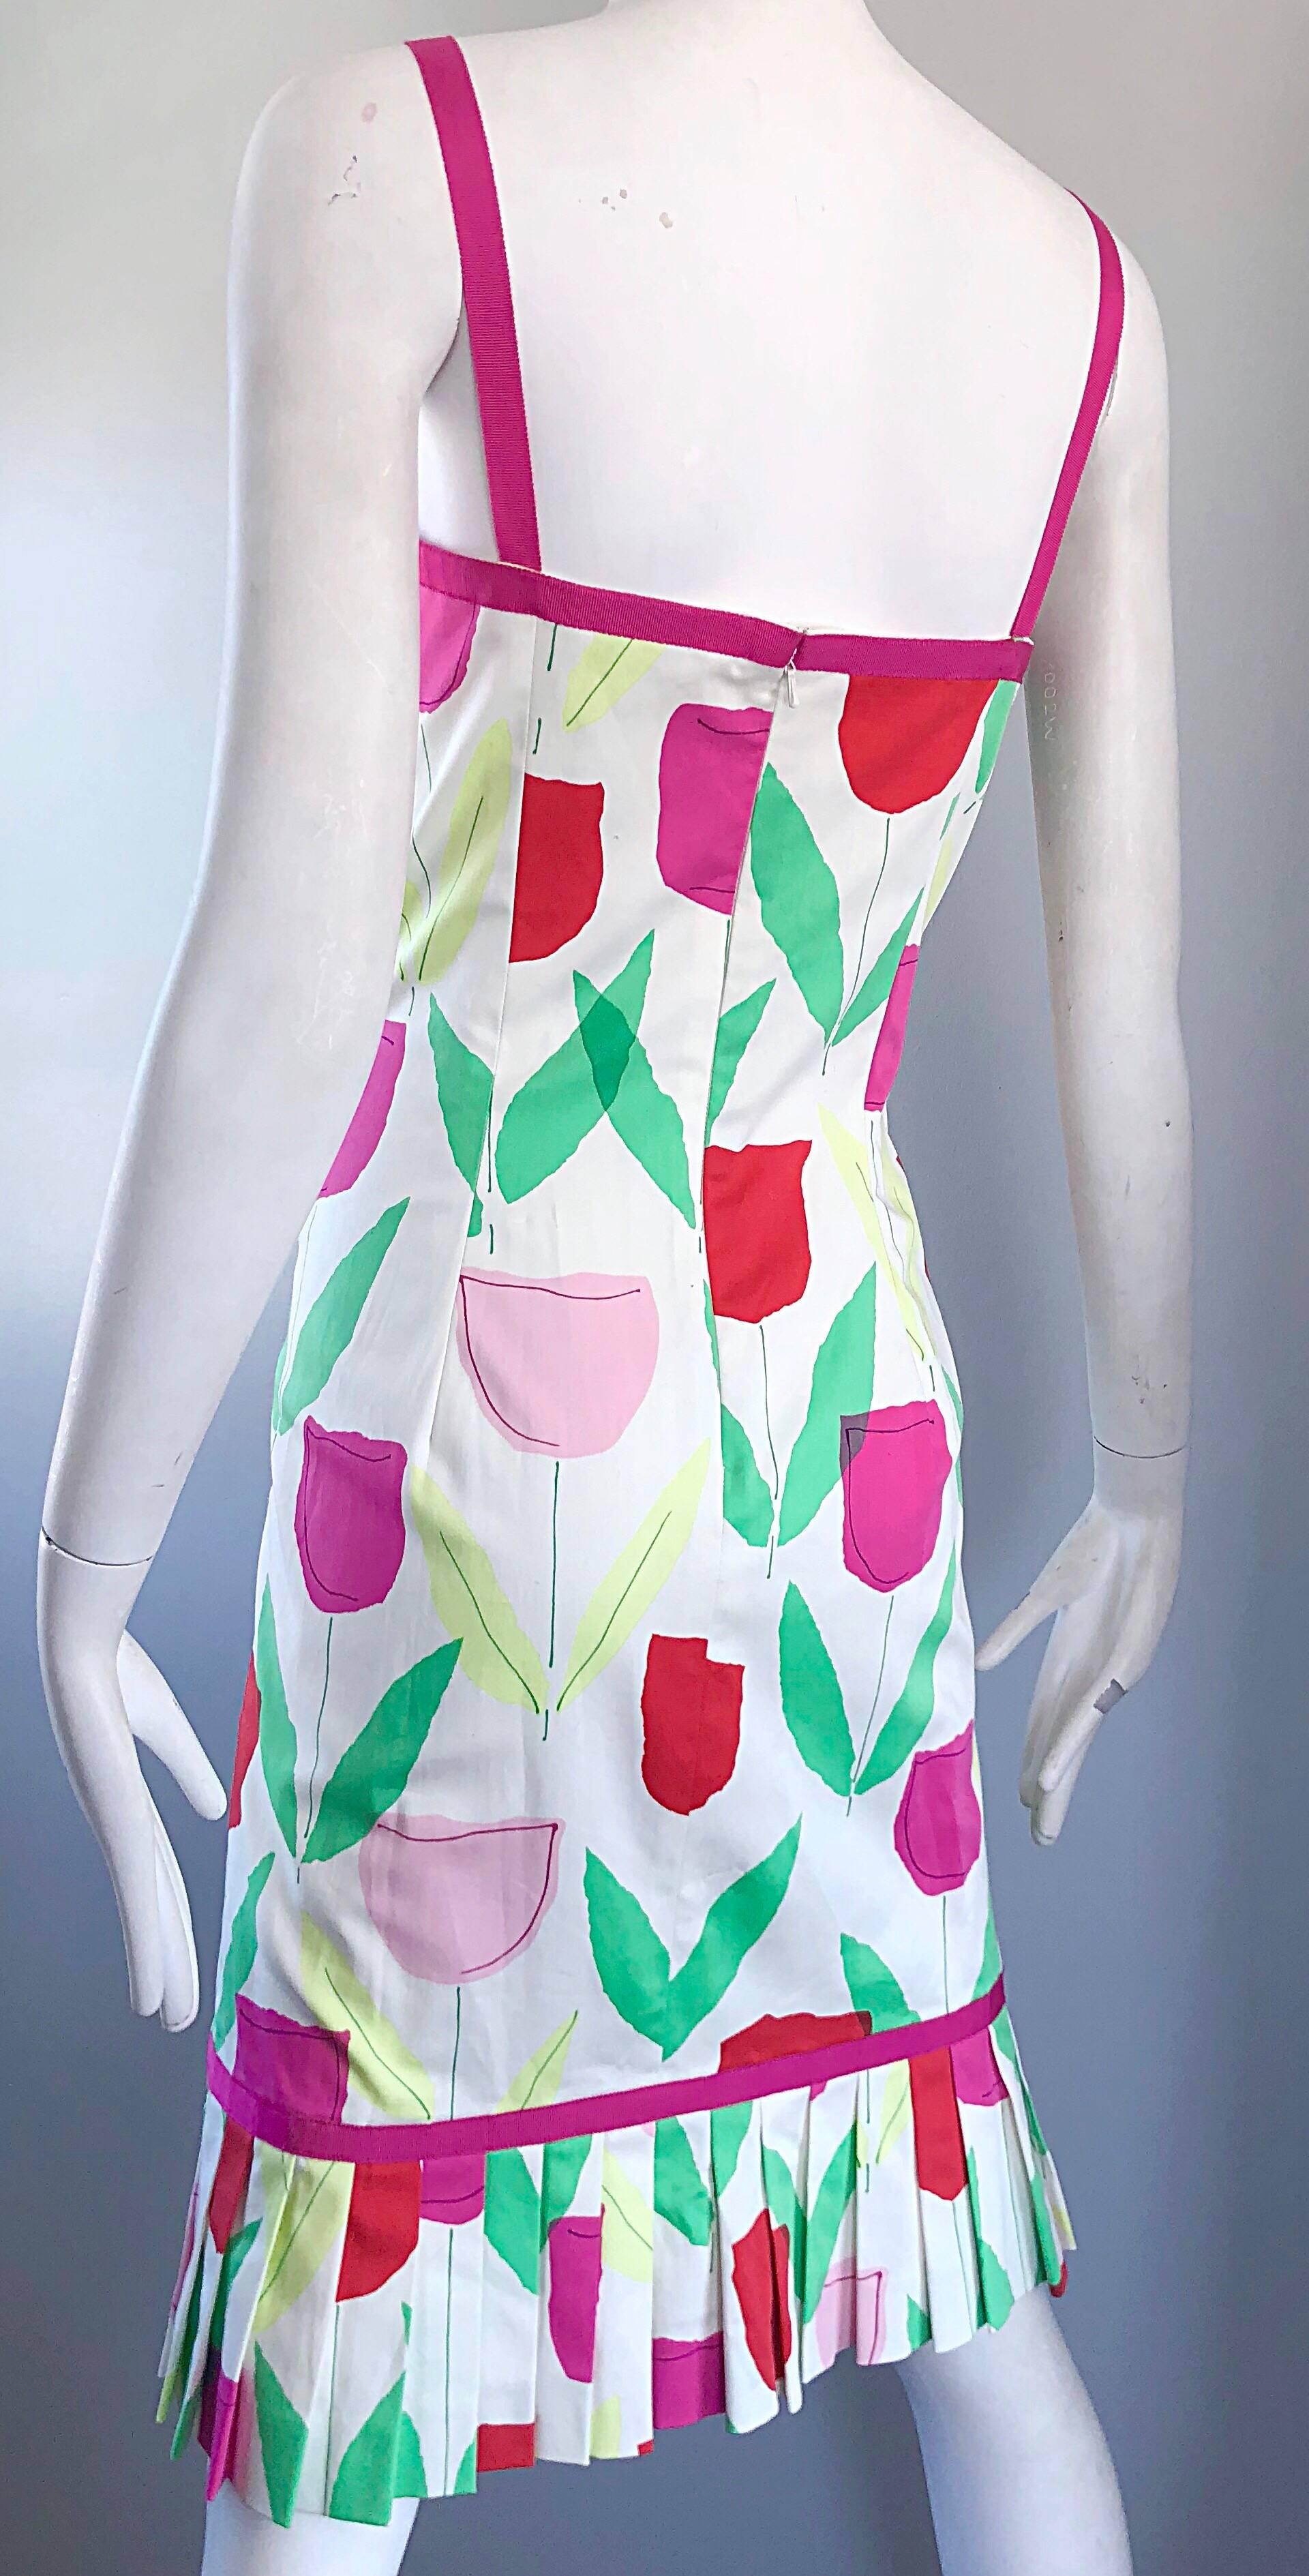 1990s Moschino Cheap & Chic Pink + Red + Green Tulip / Rose Print Vintage Dress 1